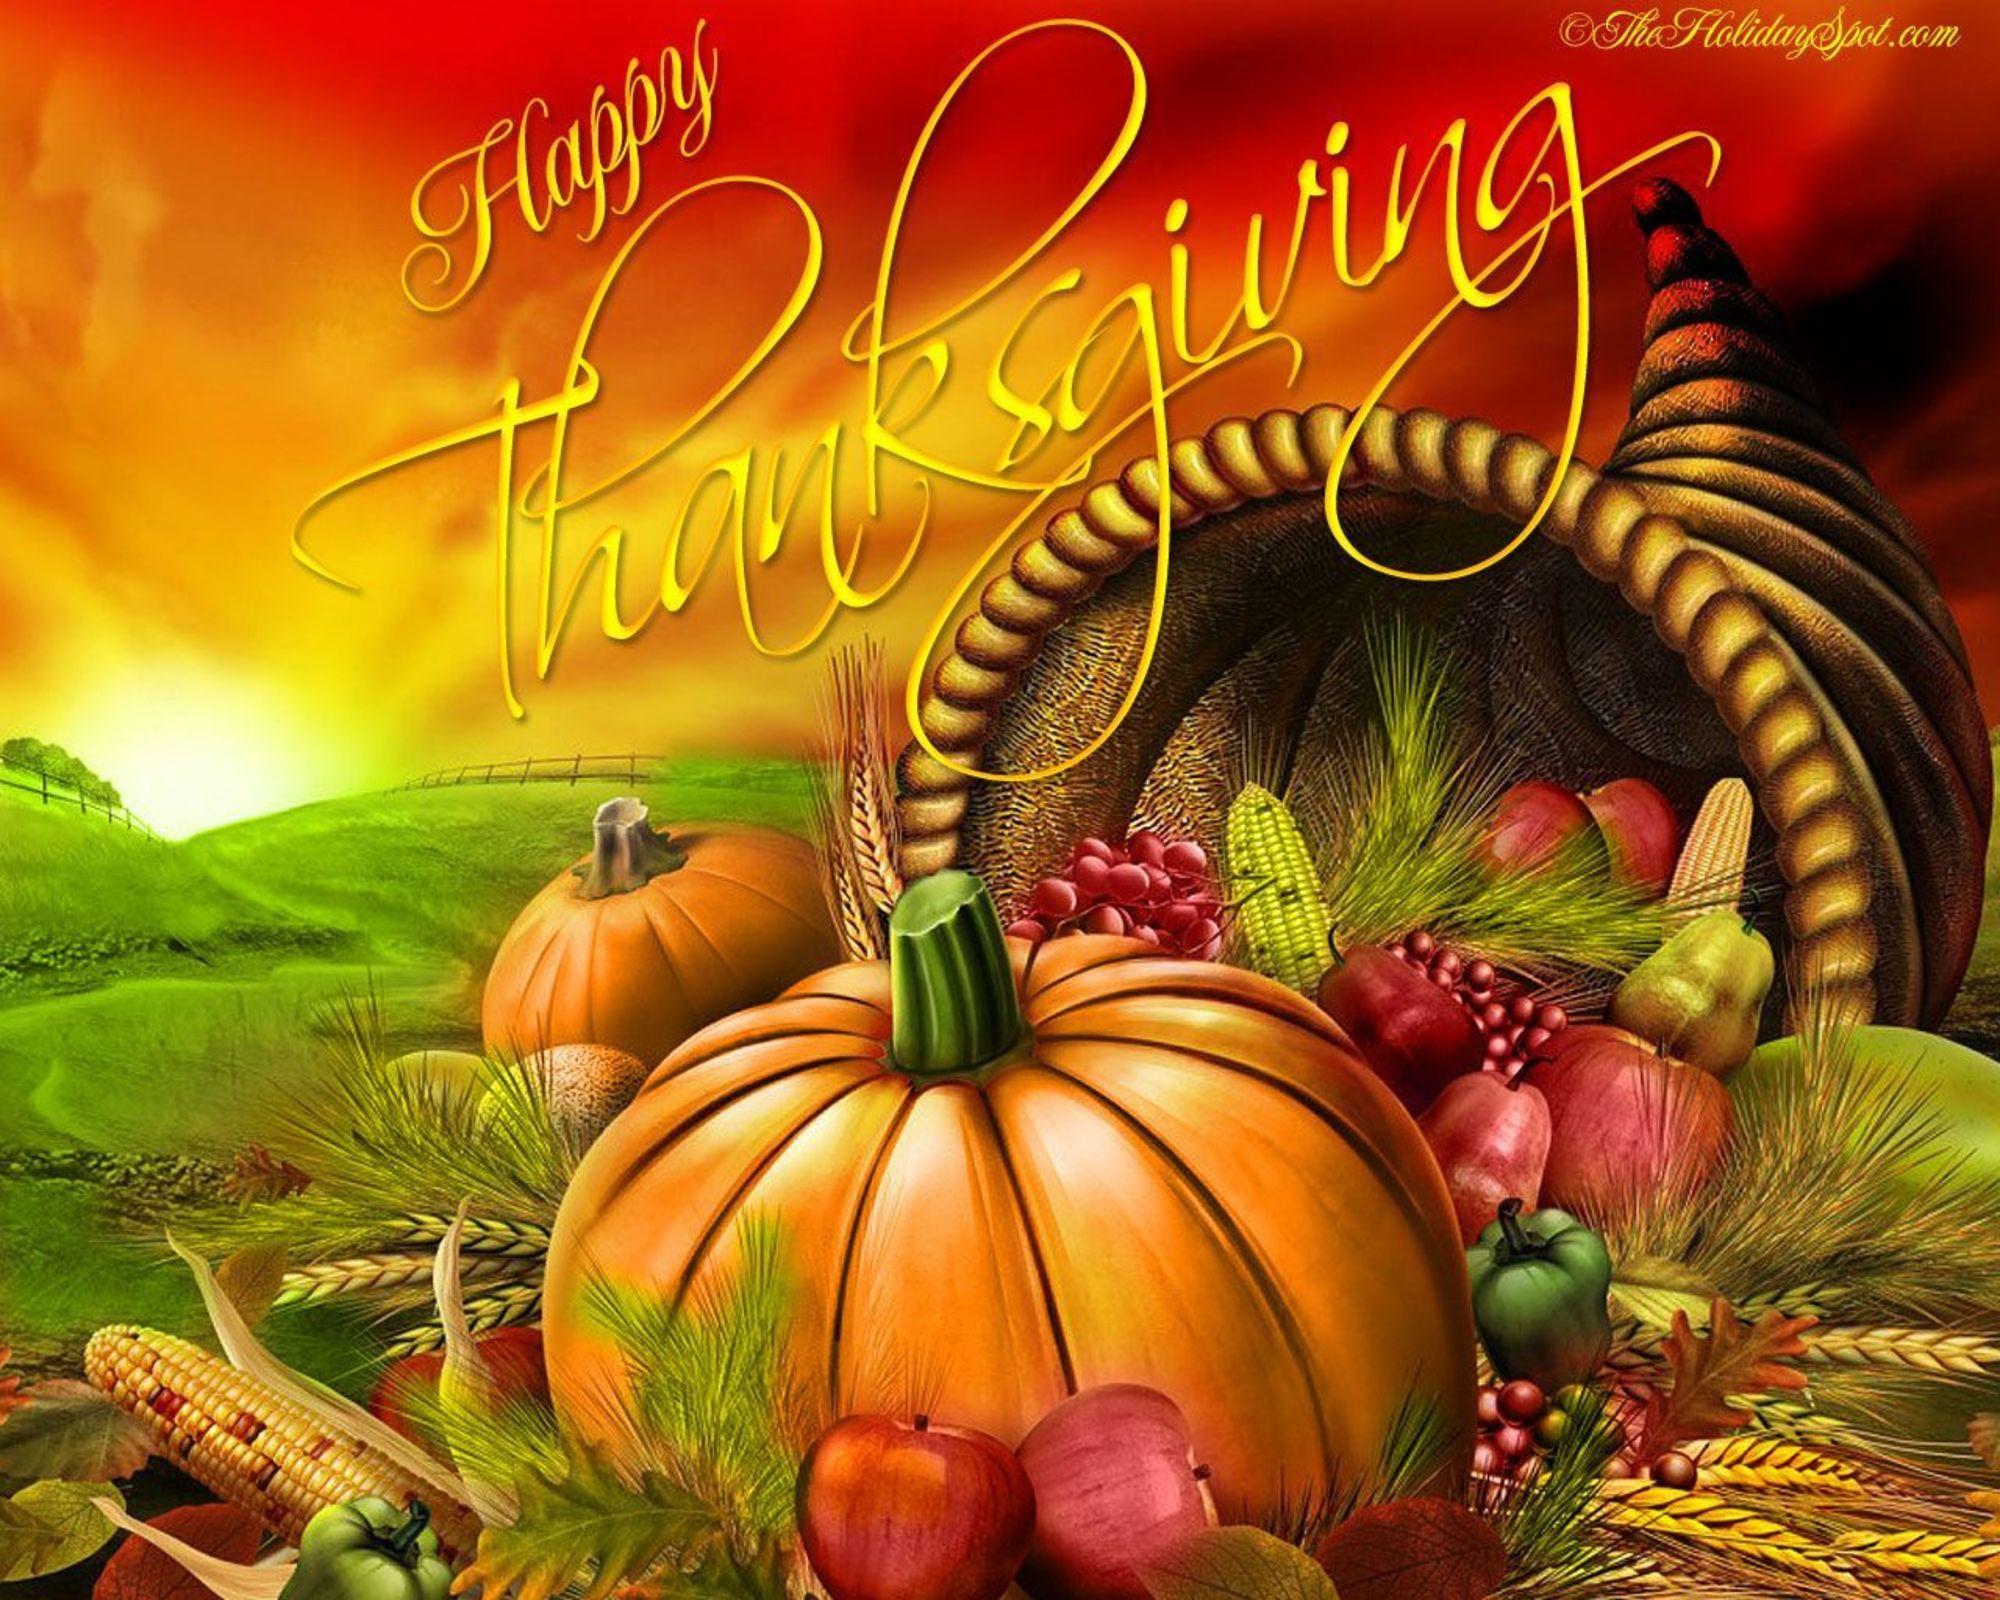 Thanksgiving Wallpapers HD  Happy Thanksgiving Wallpaper Desktop and  Backgrounds Images